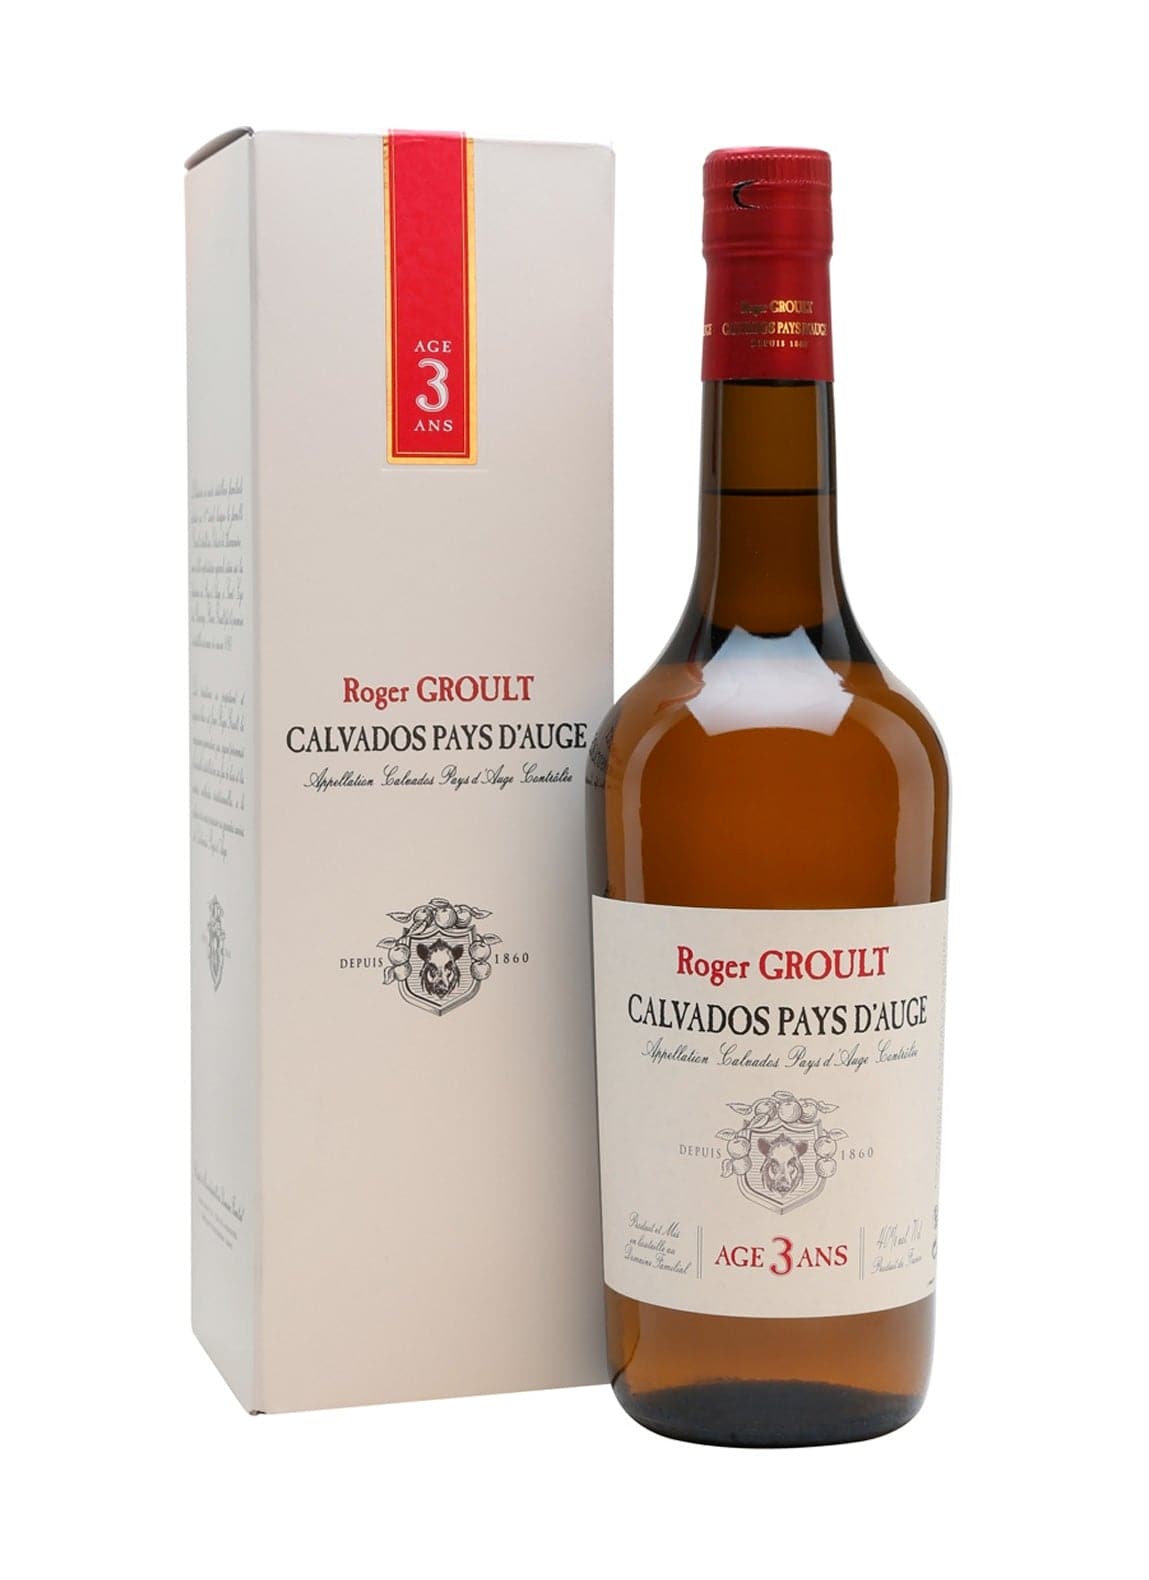 Roger Groult Calvados Pays D'Auge 3 years 40% 700ml | Brandy | Shop online at Spirits of France